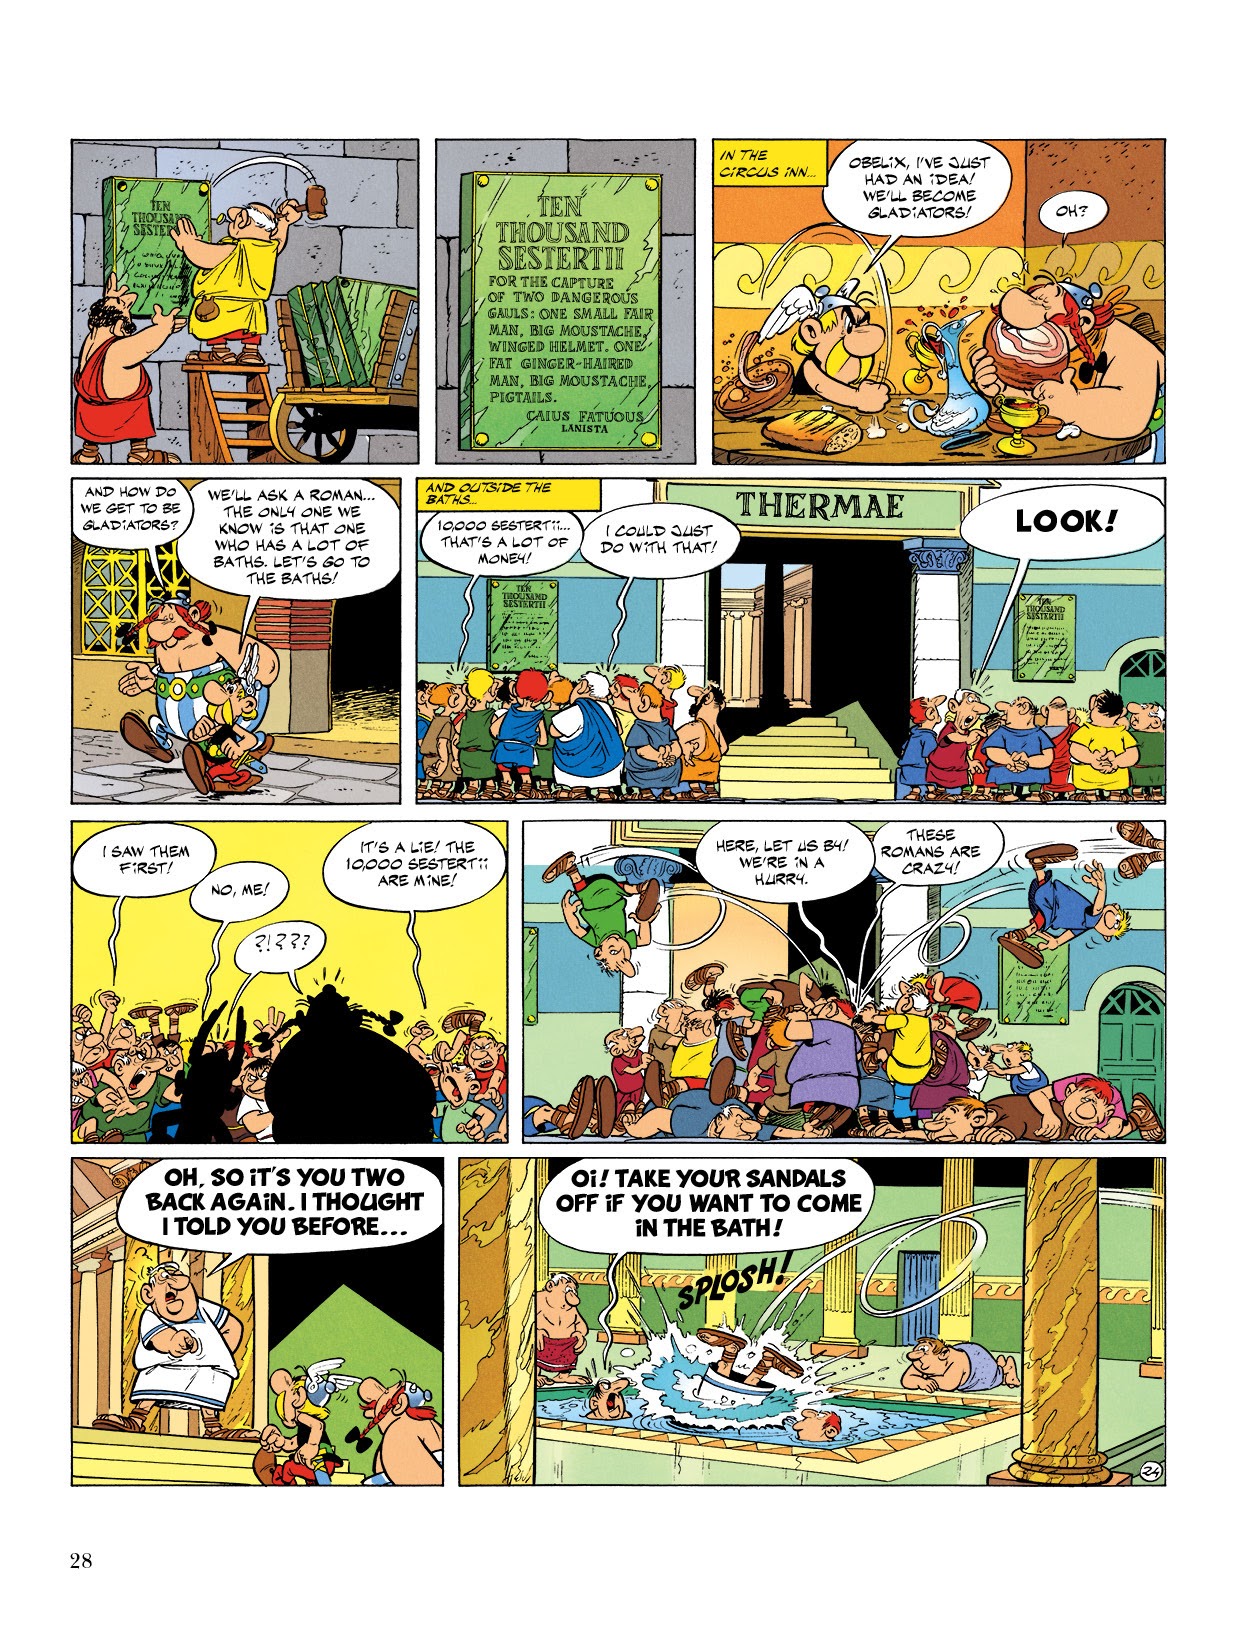 Read online Asterix comic -  Issue #4 - 29